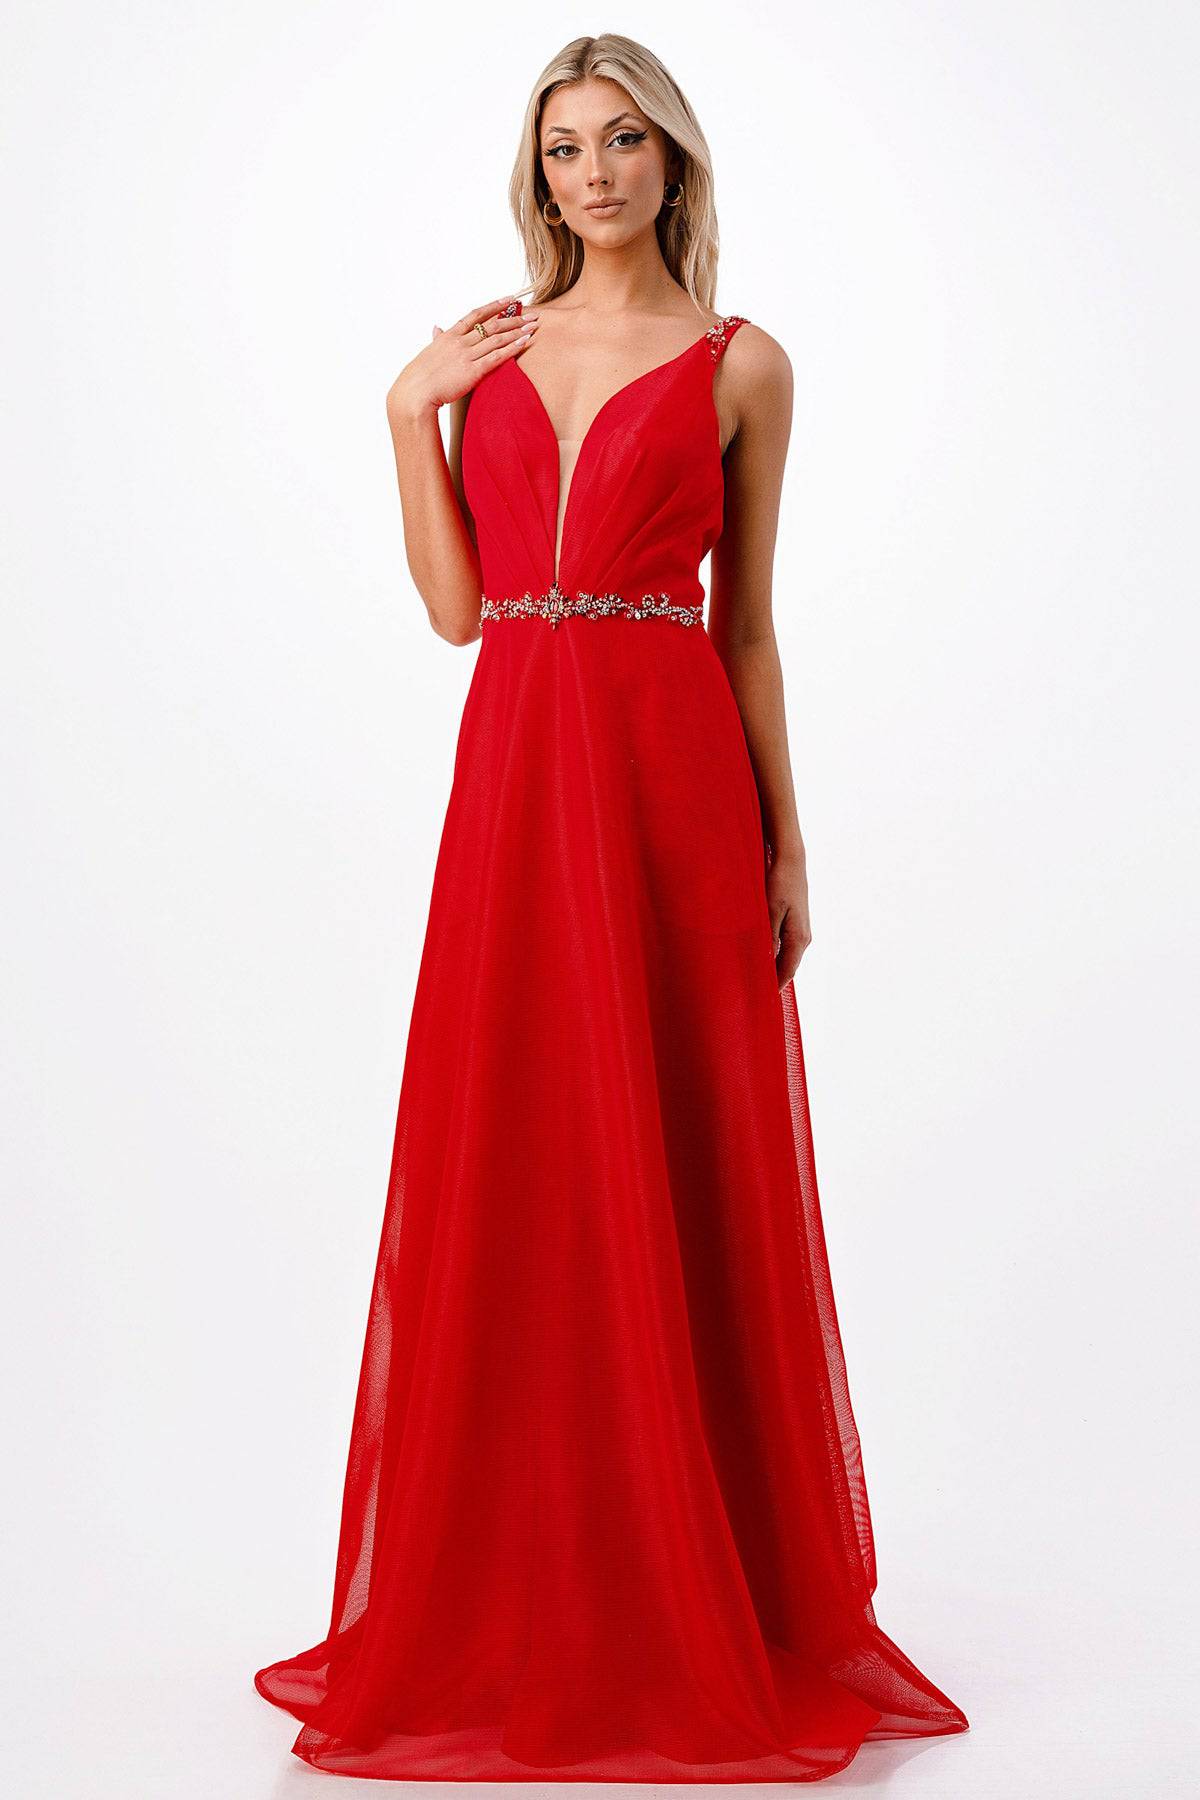 Aspeed P2115 Ruched Satin A Line Dress with Crystal Embroidery - NORMA REED